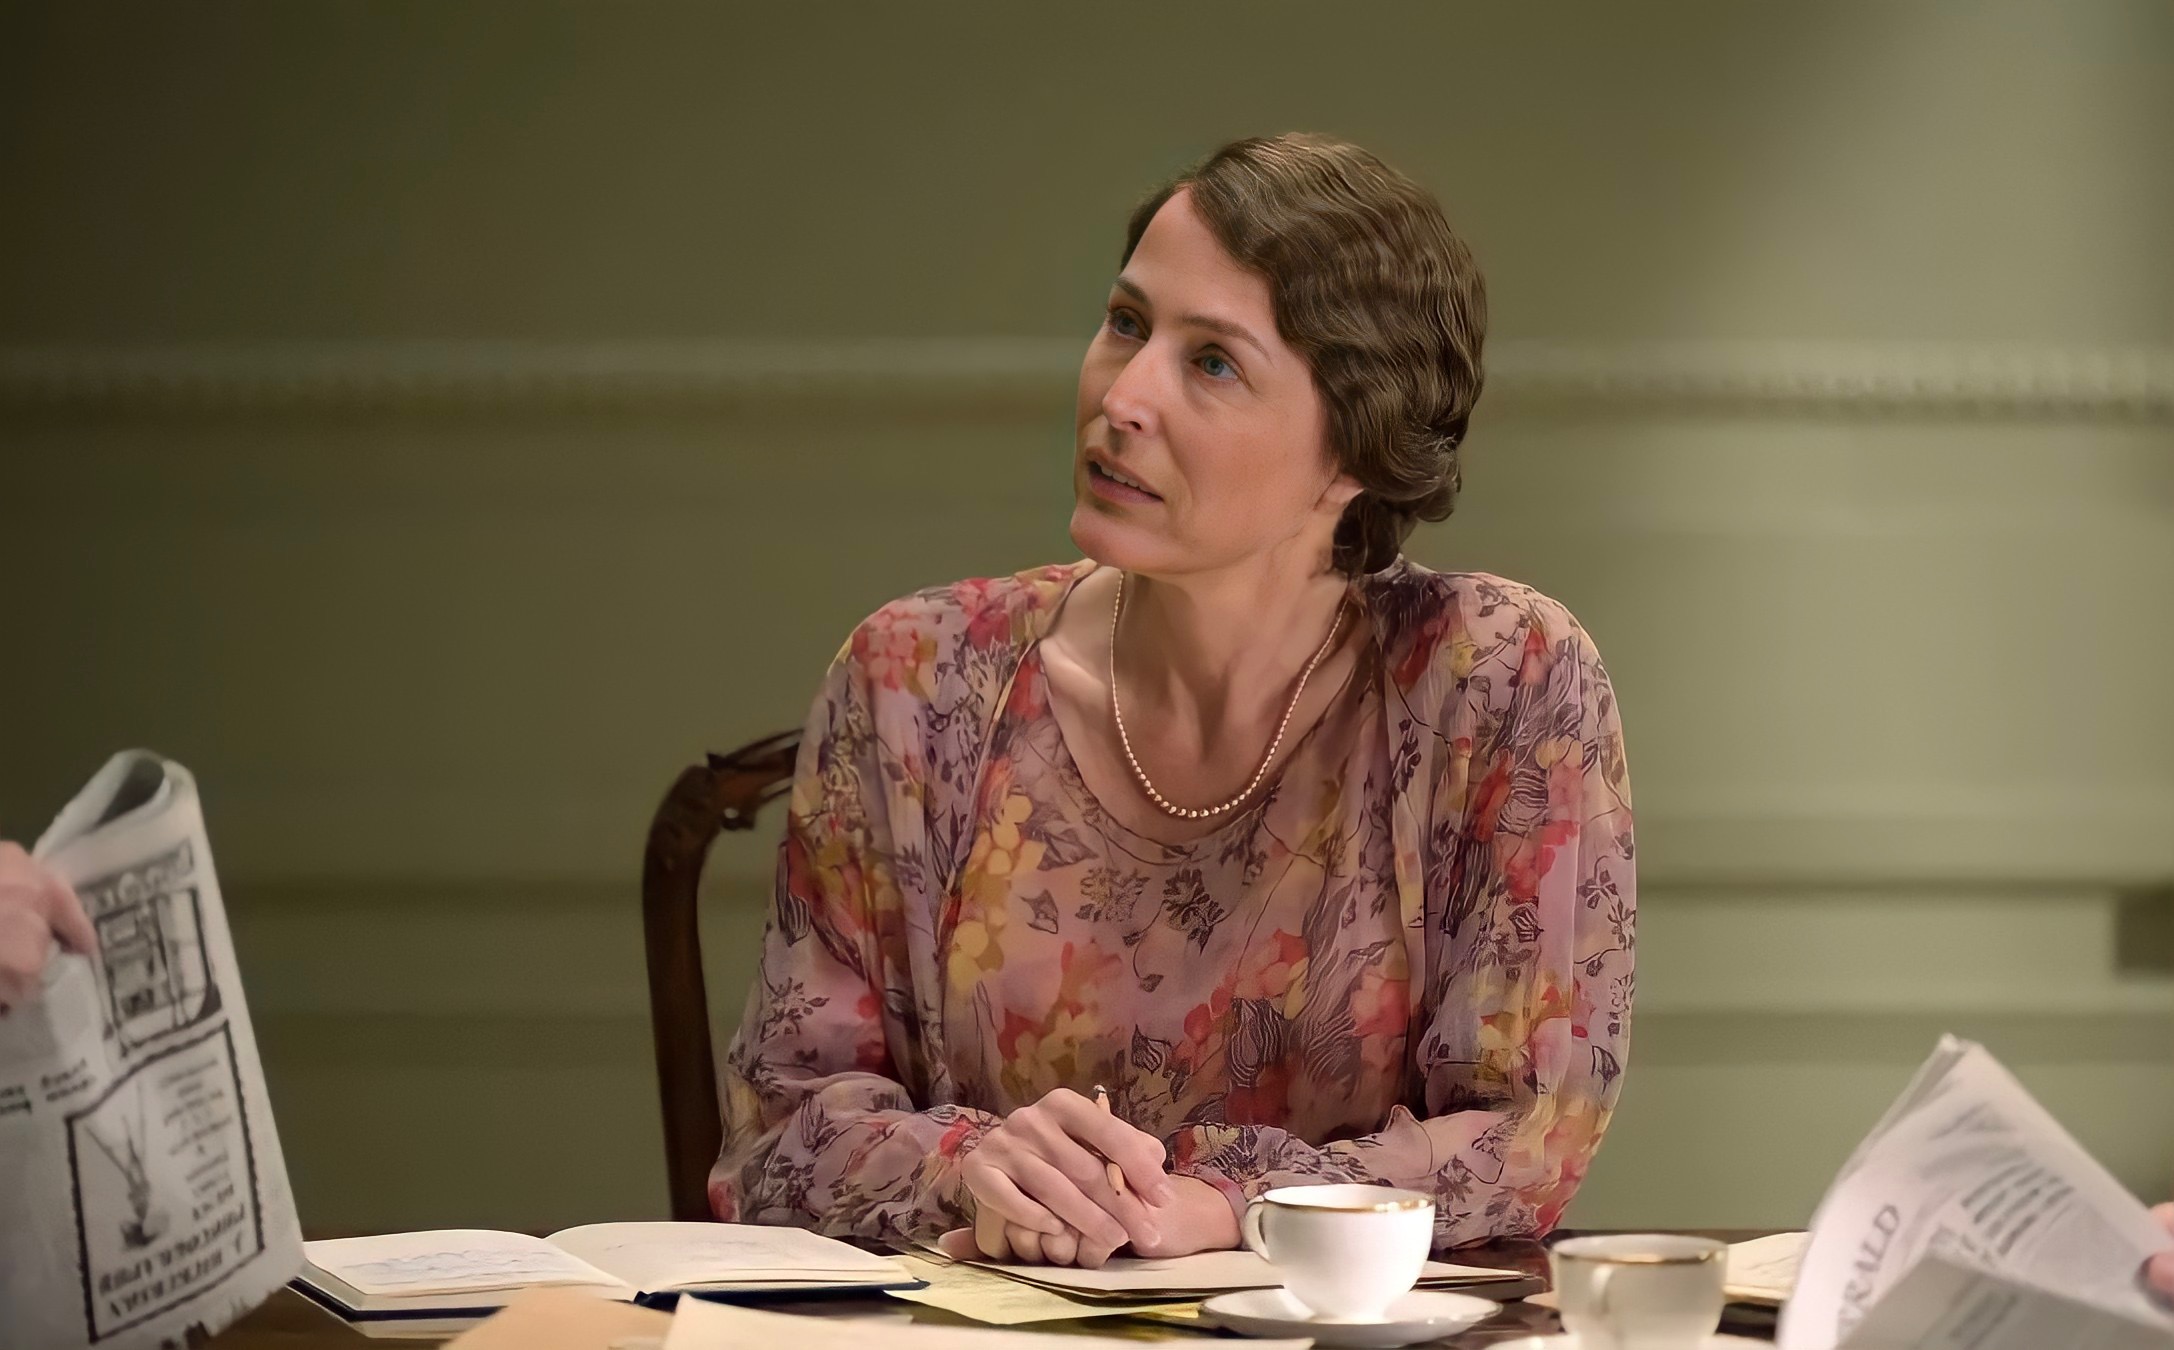 Cailee Spaeny as Anna Eleonore Roosevelt and Gillian Anderson as Eleonore Roosevelt in The First Lady